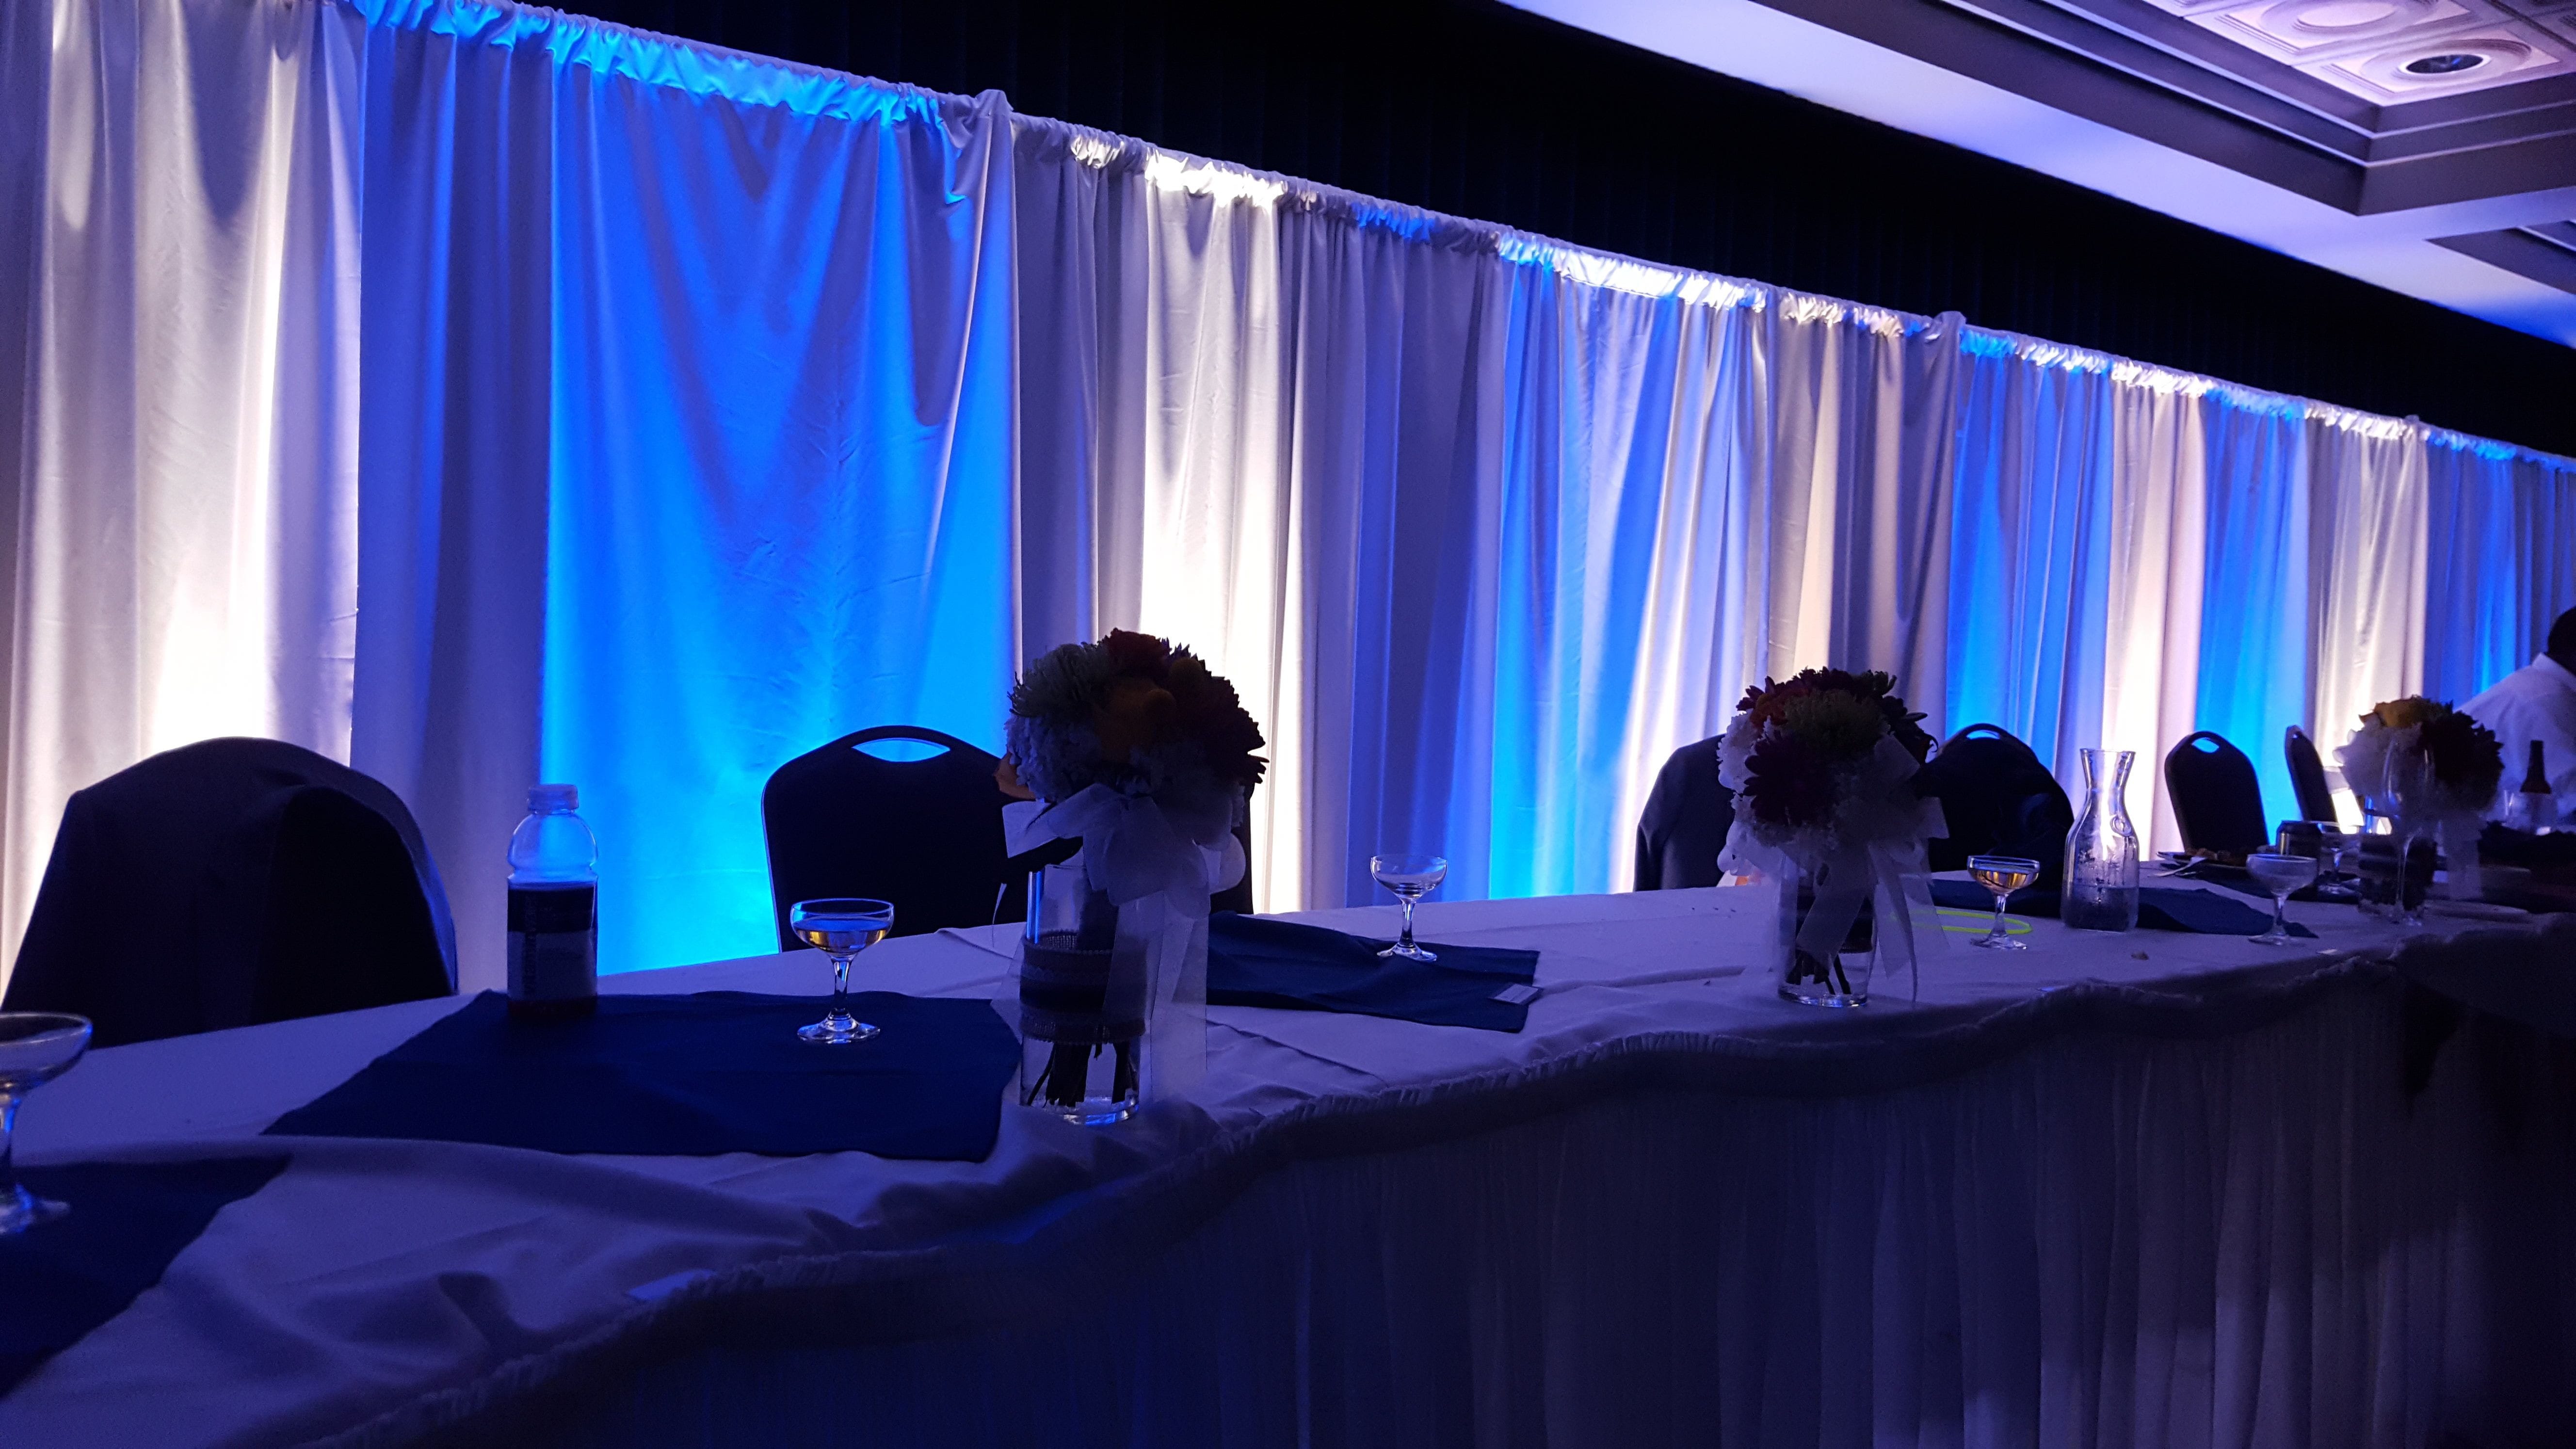 Head Table backdrop lighting at Kirby Ballroom in blue and white.